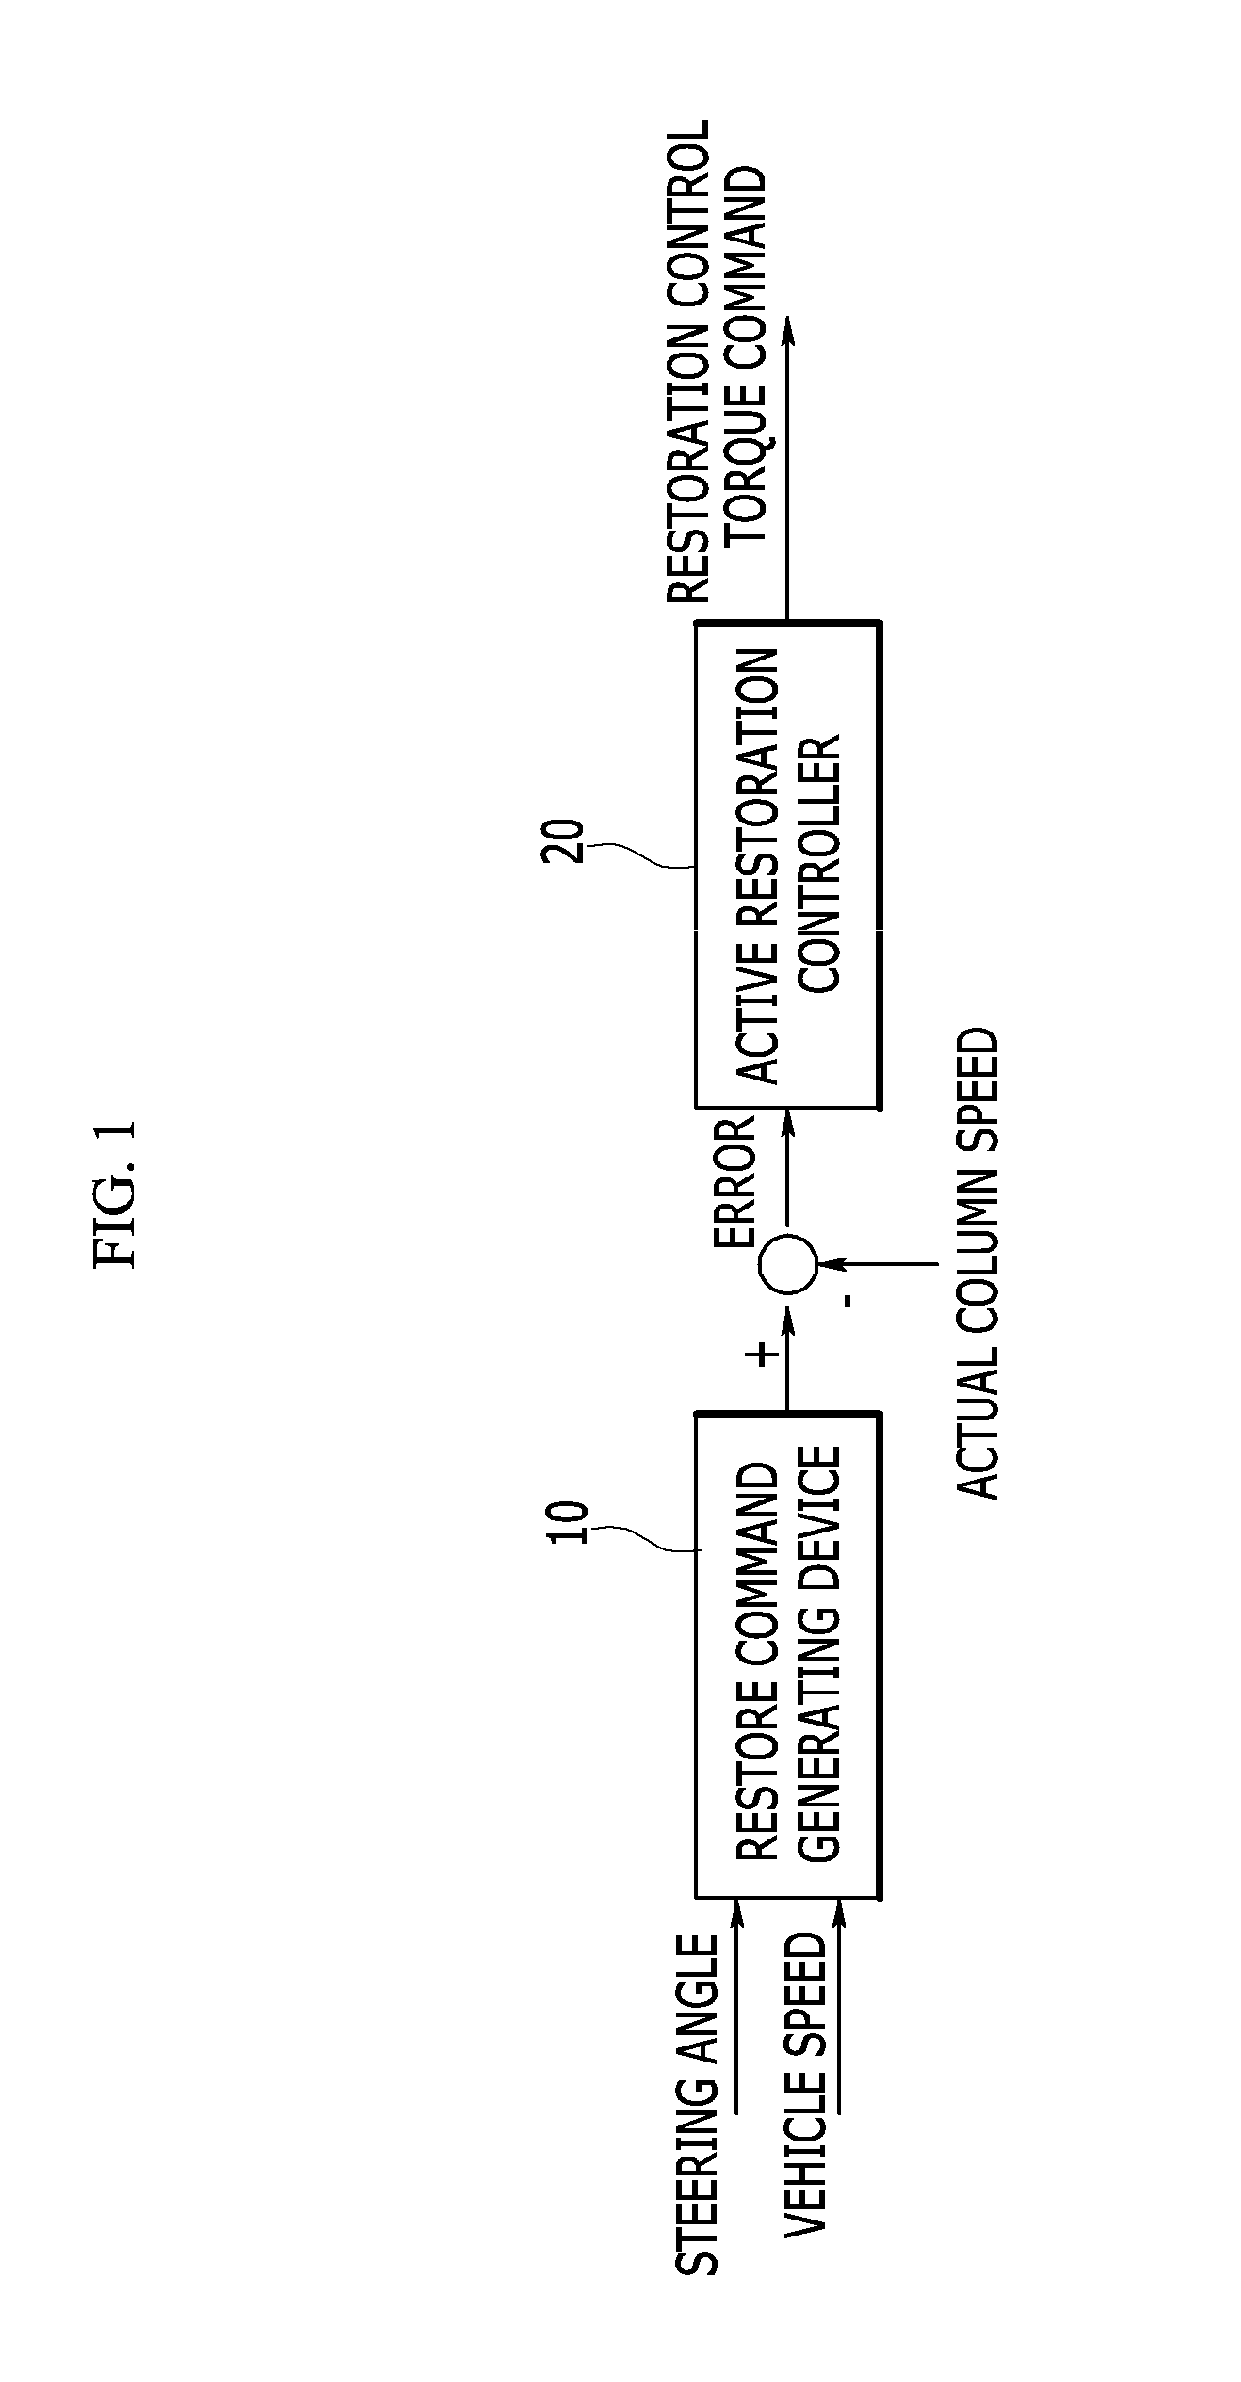 Device for controlling restoration of mdps system